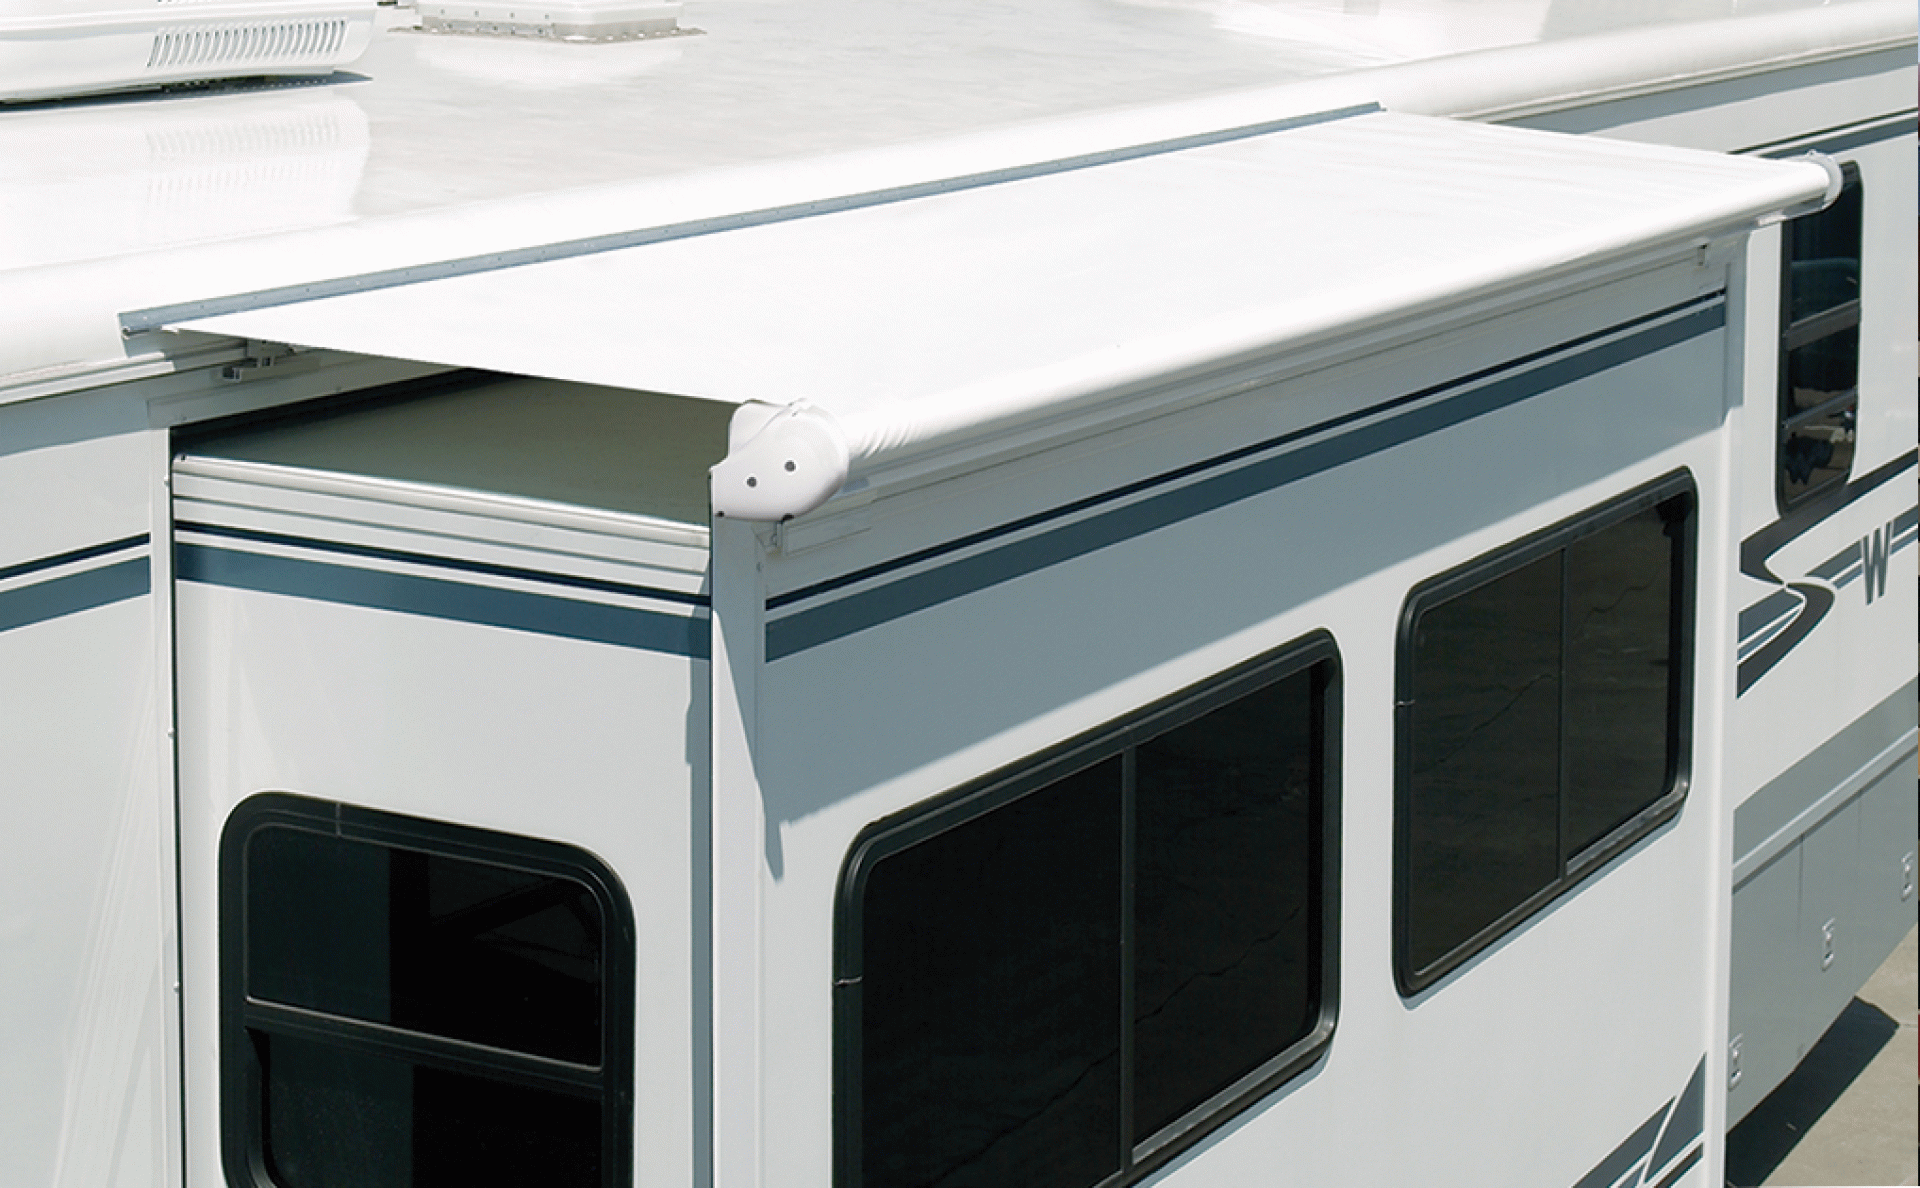 CAREFREE OF COLORADO | UQ0730025 | SIDEOUT KOVER III AWNING 70" - 73" ROOF RANGE WHITE VINYL FABRIC & DEFLECTOR